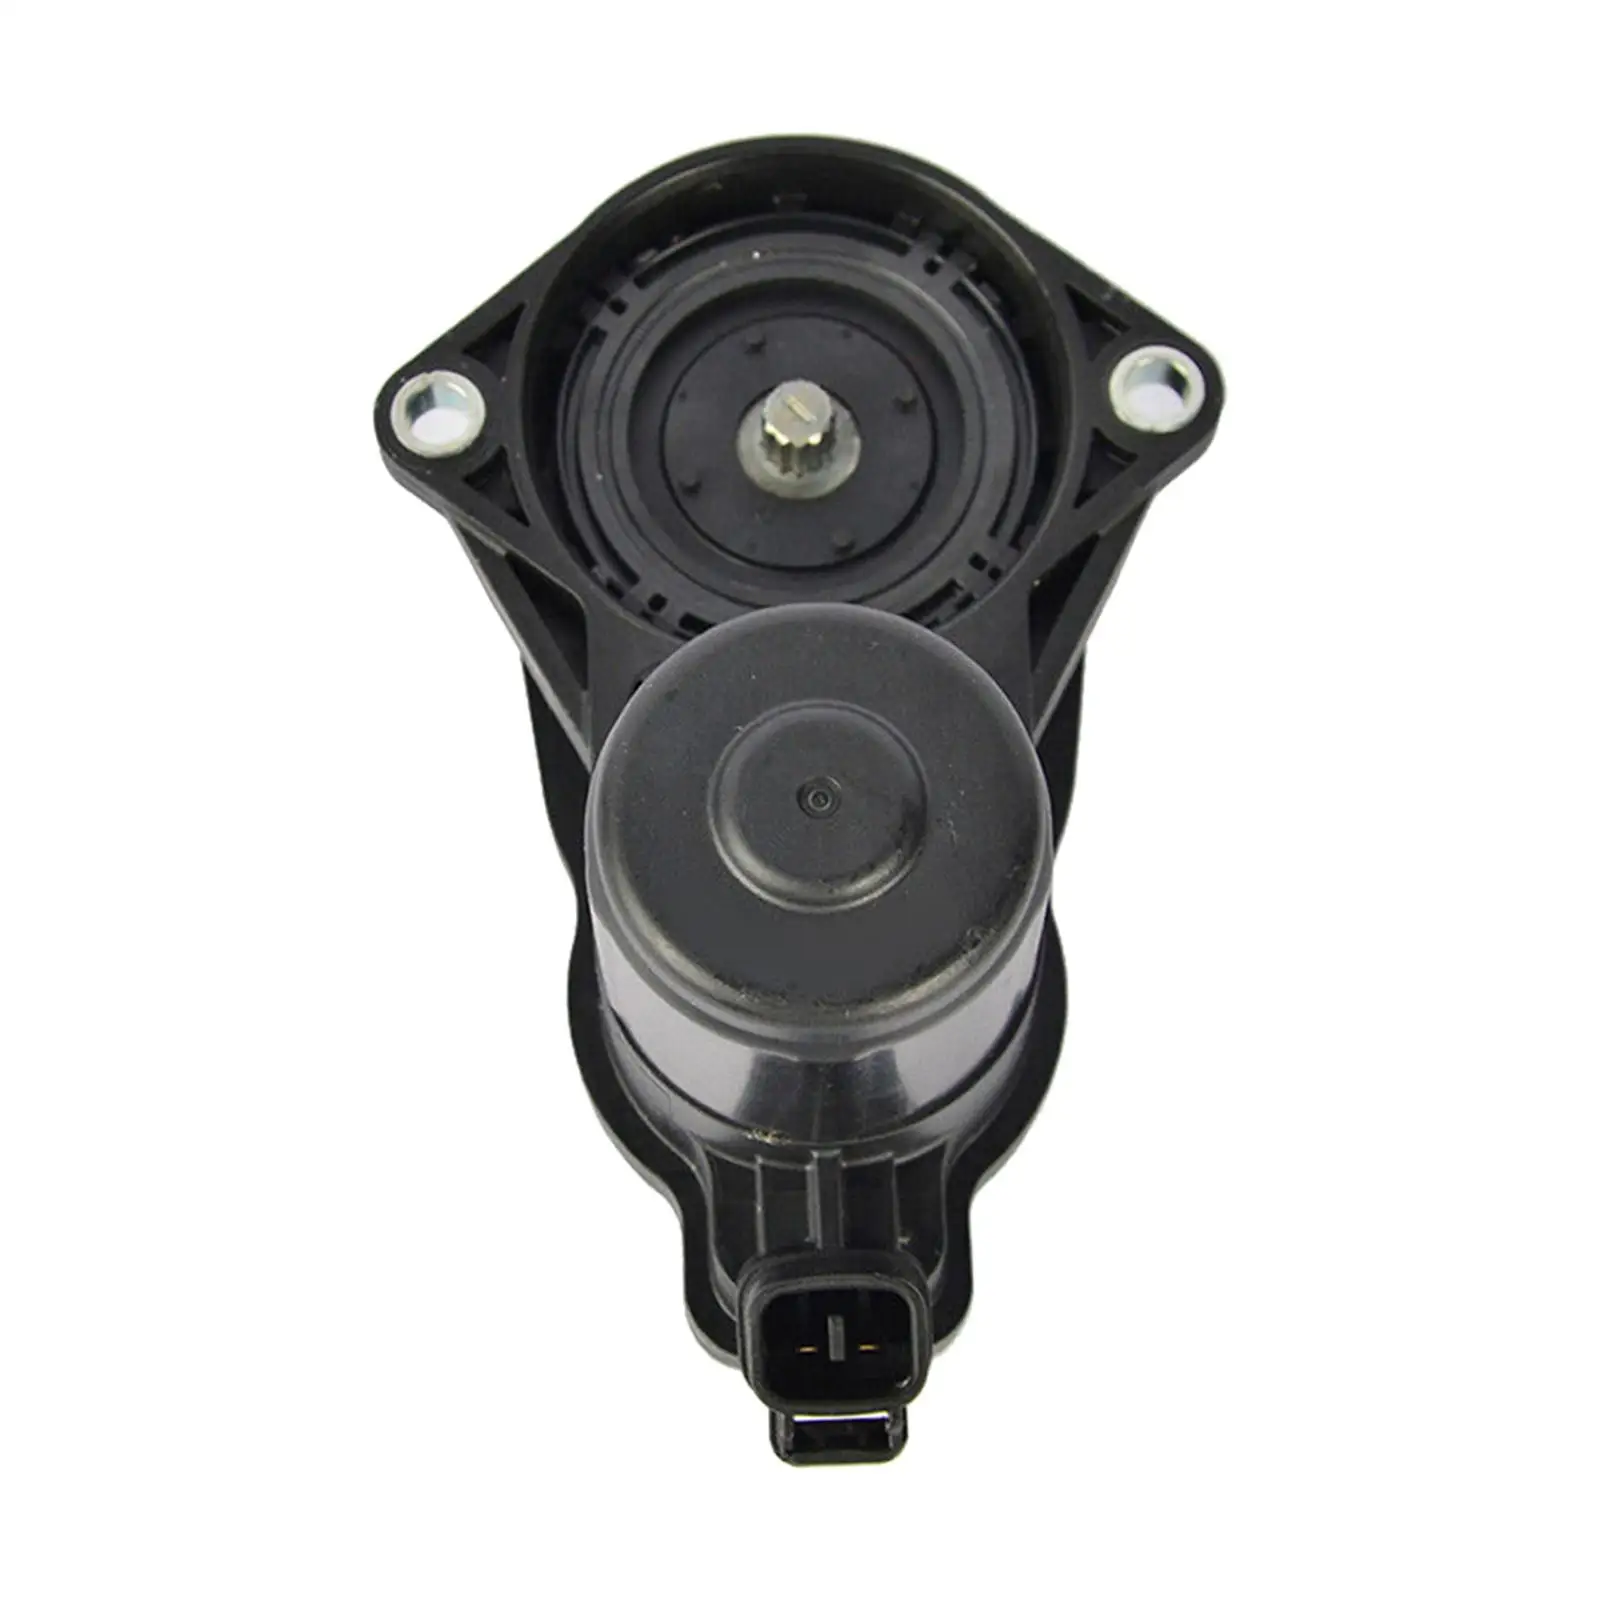 Parking Brake Actuator Replacement Automotive Replacement Part for Toyota for highlander Venza Corolla Hatchback